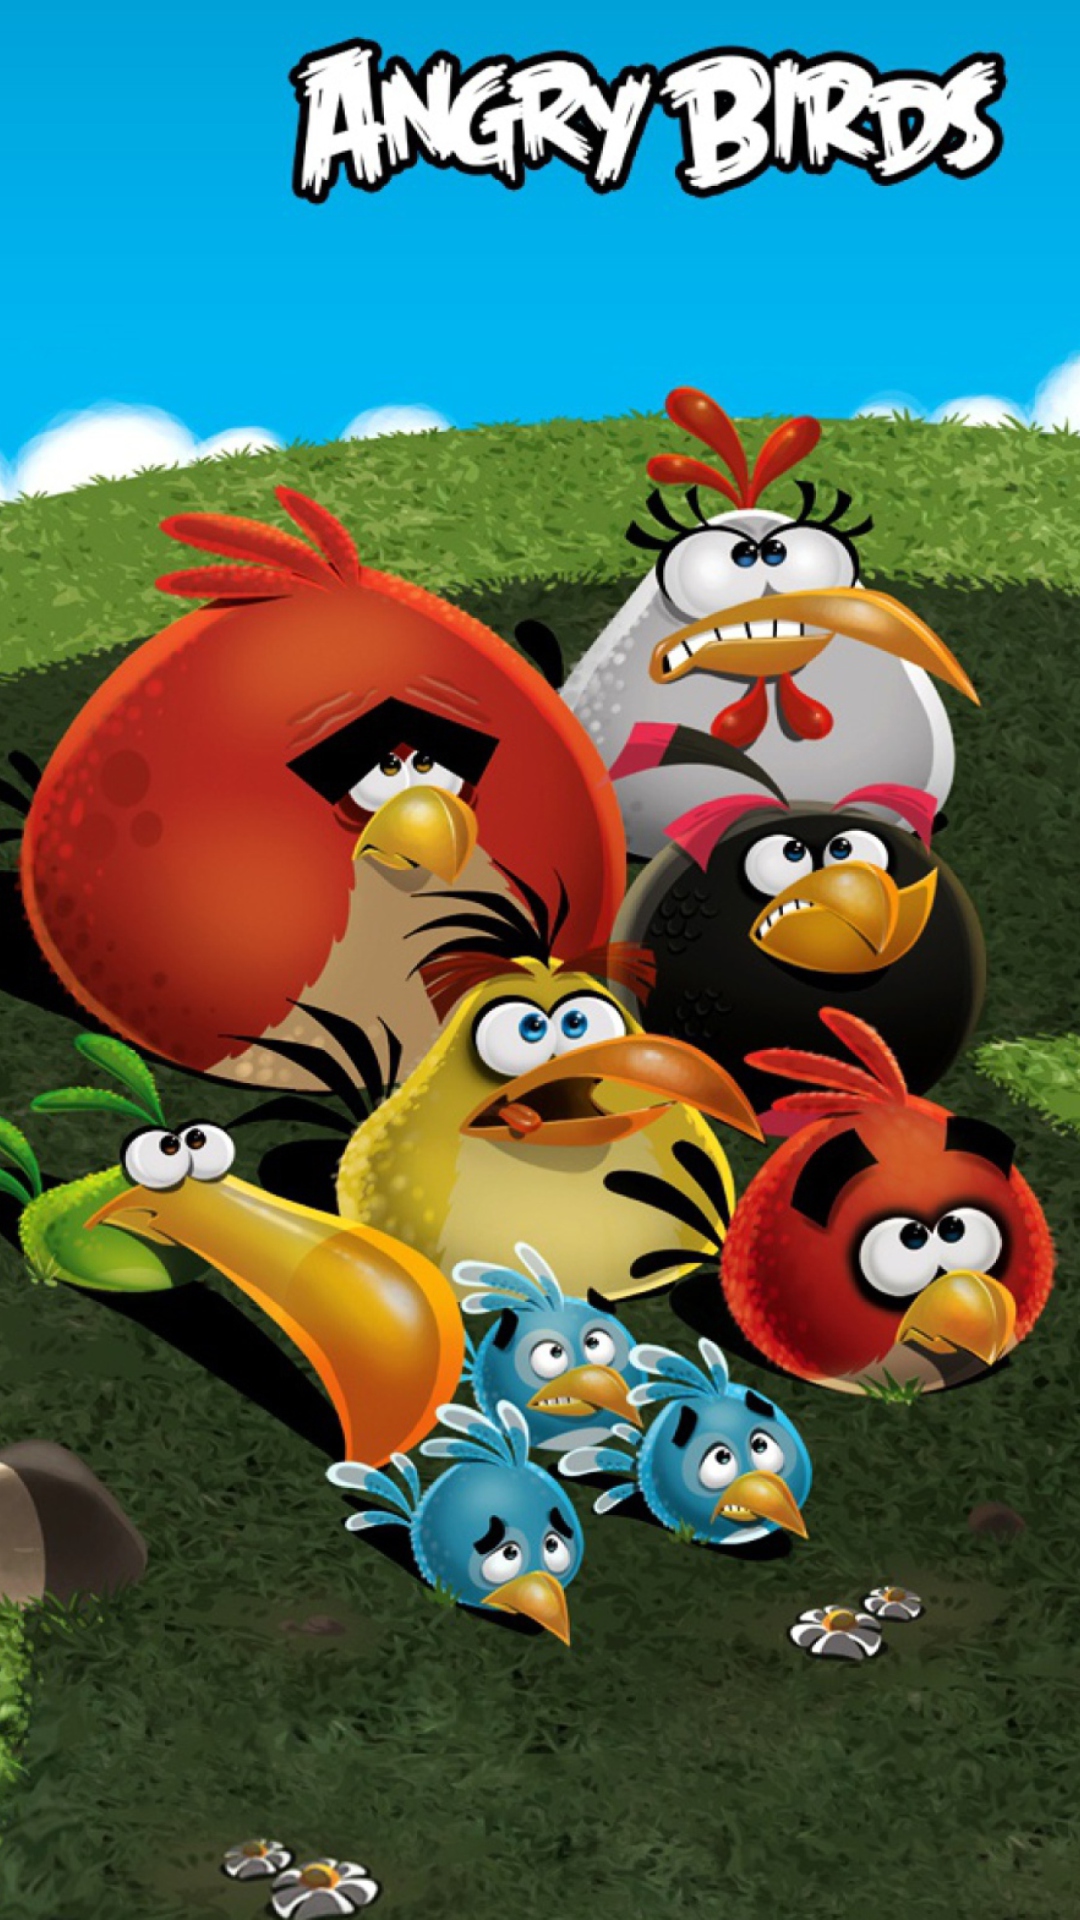 Angry Birds wallpaper 1080x1920